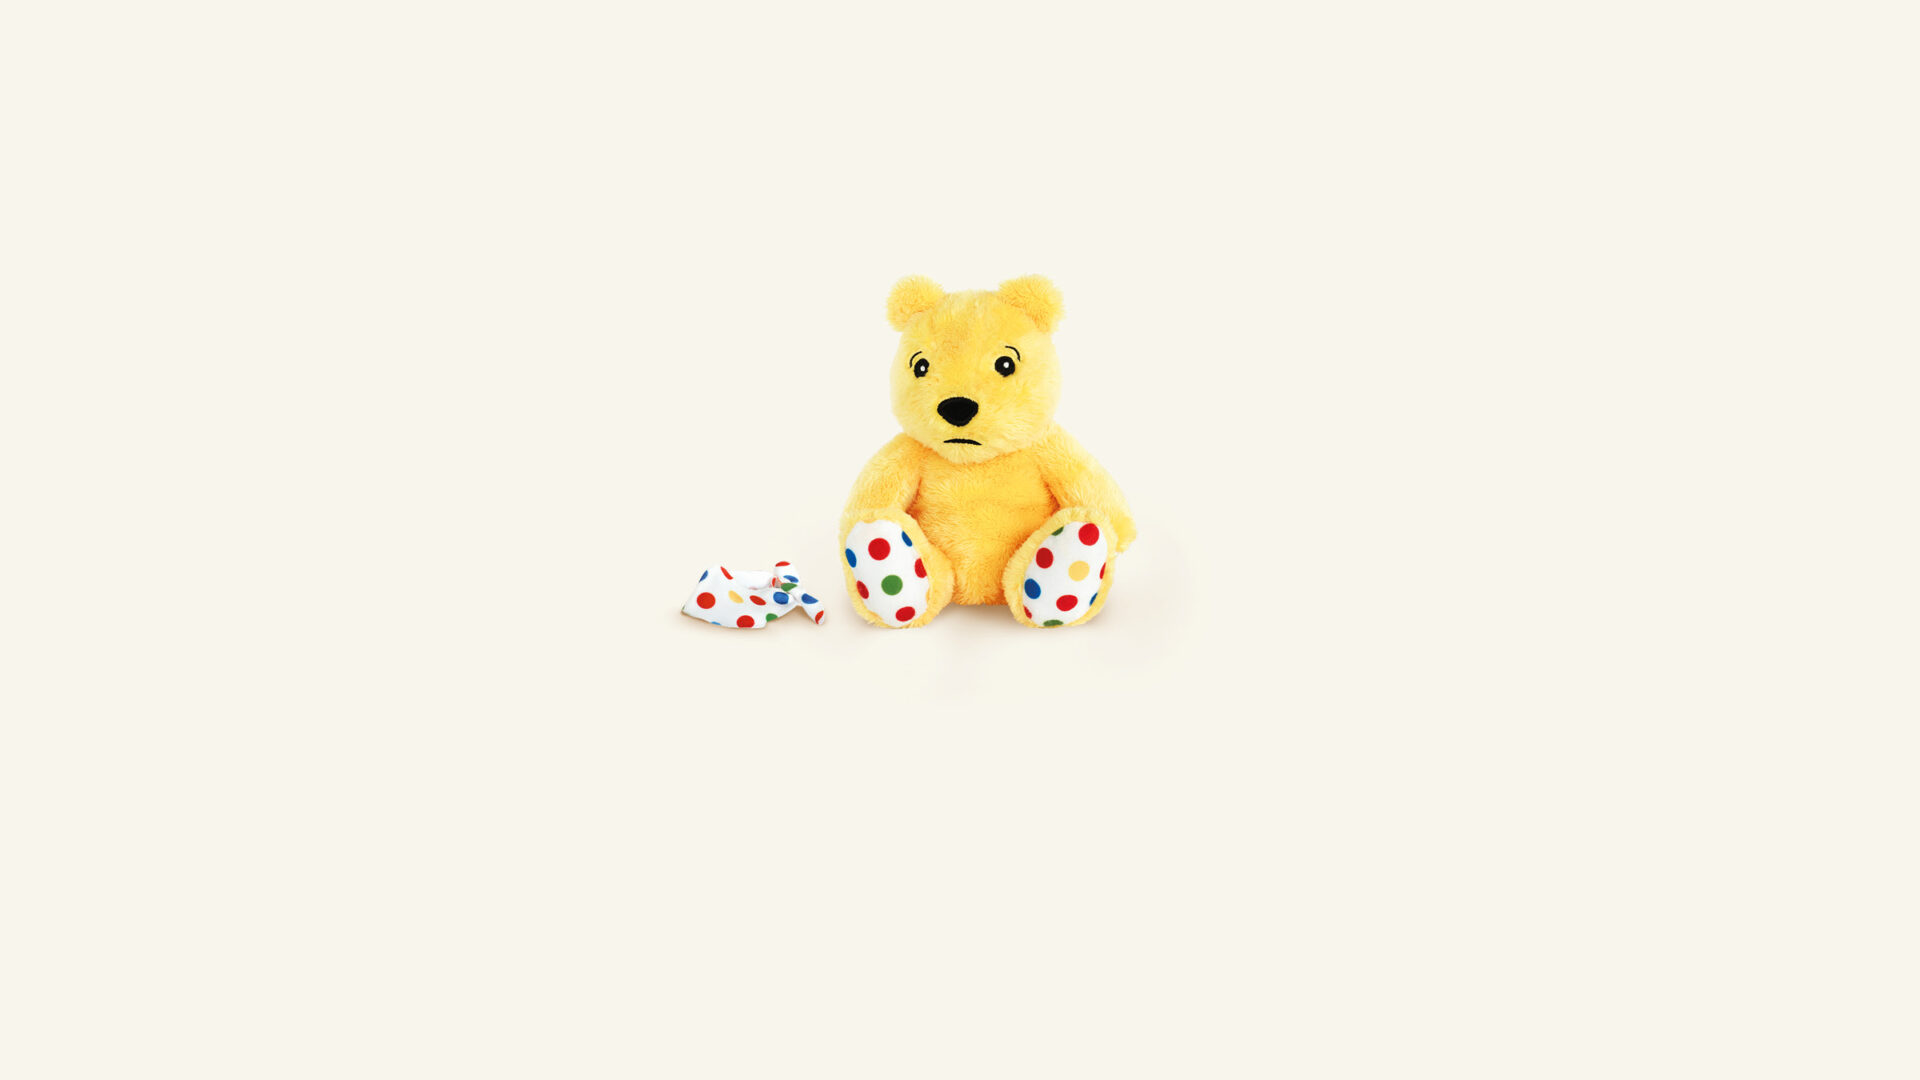 Pudsey Bear looking sad with his Bandana on the floor next to him